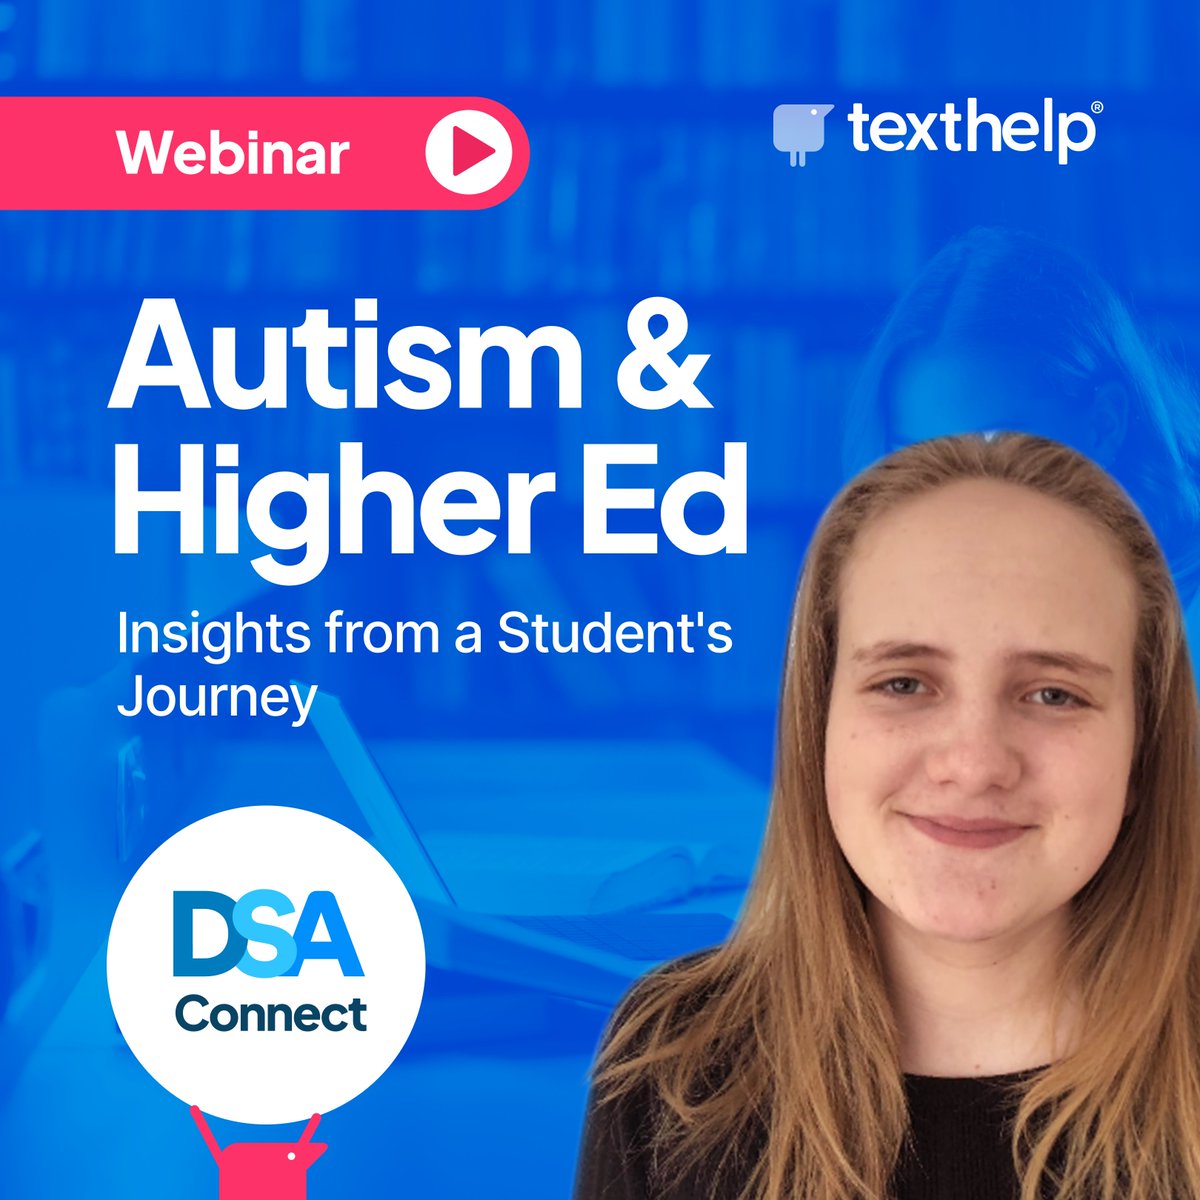 Mark your calendars! On June 19th, Texthelp’s Head of DSA Education @TH_nicole14 will host a webinar featuring the incredible journey of autistic student @neuro_lou through higher education. Learn firsthand how DSA support can make all the difference. texthelp.com/en-gb/resource…